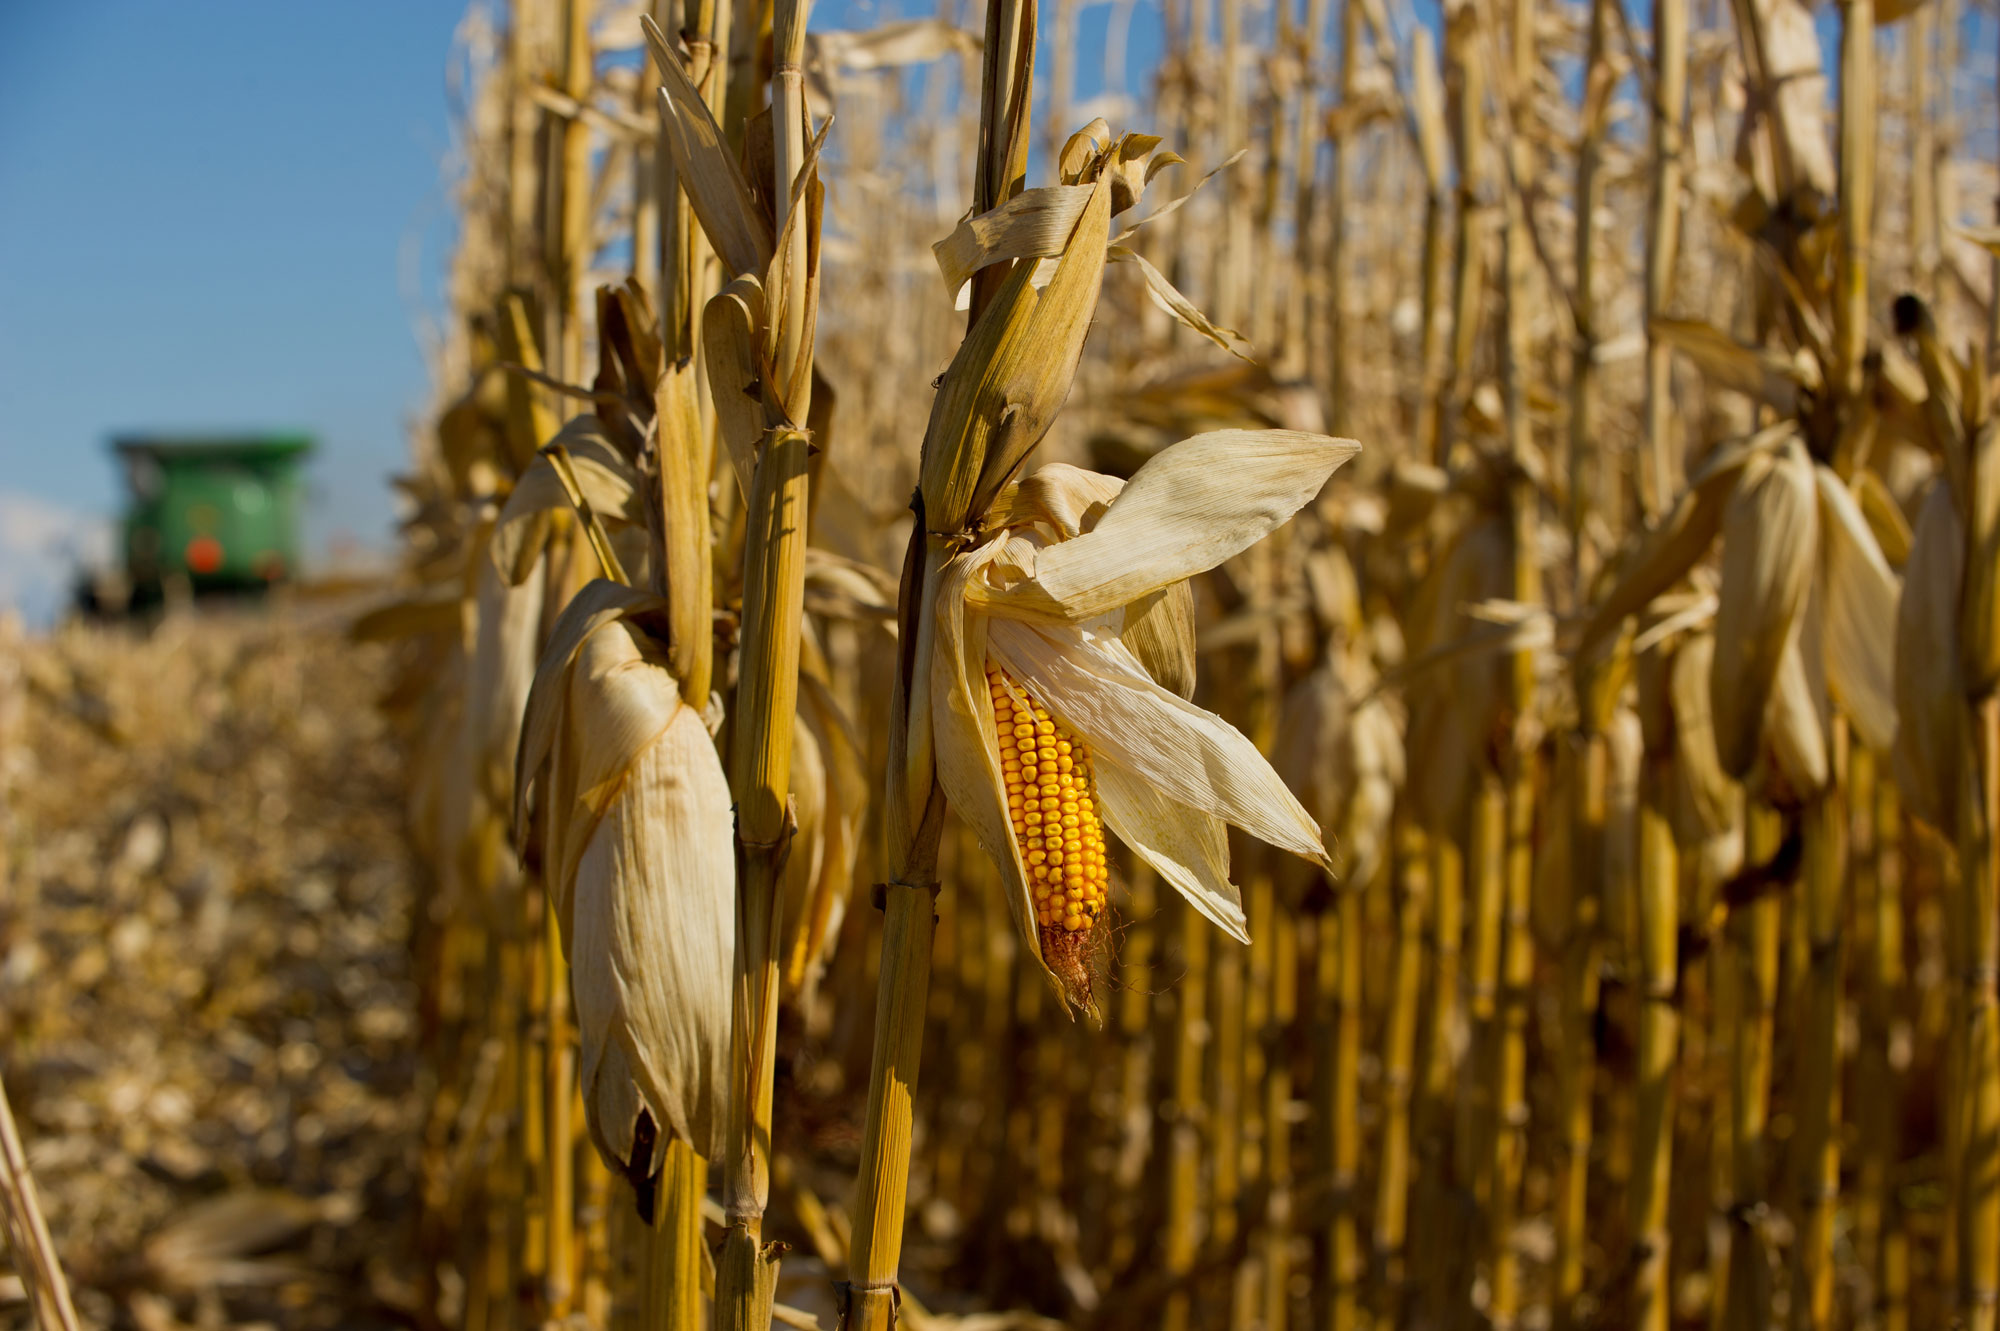 Photograph of maize. The photo shows a close-up rows of dried cornstalks with mature corn. The husk has been partially opened on one ear of corn, exposing the kernels. A combine is present in the left background, out of focus.